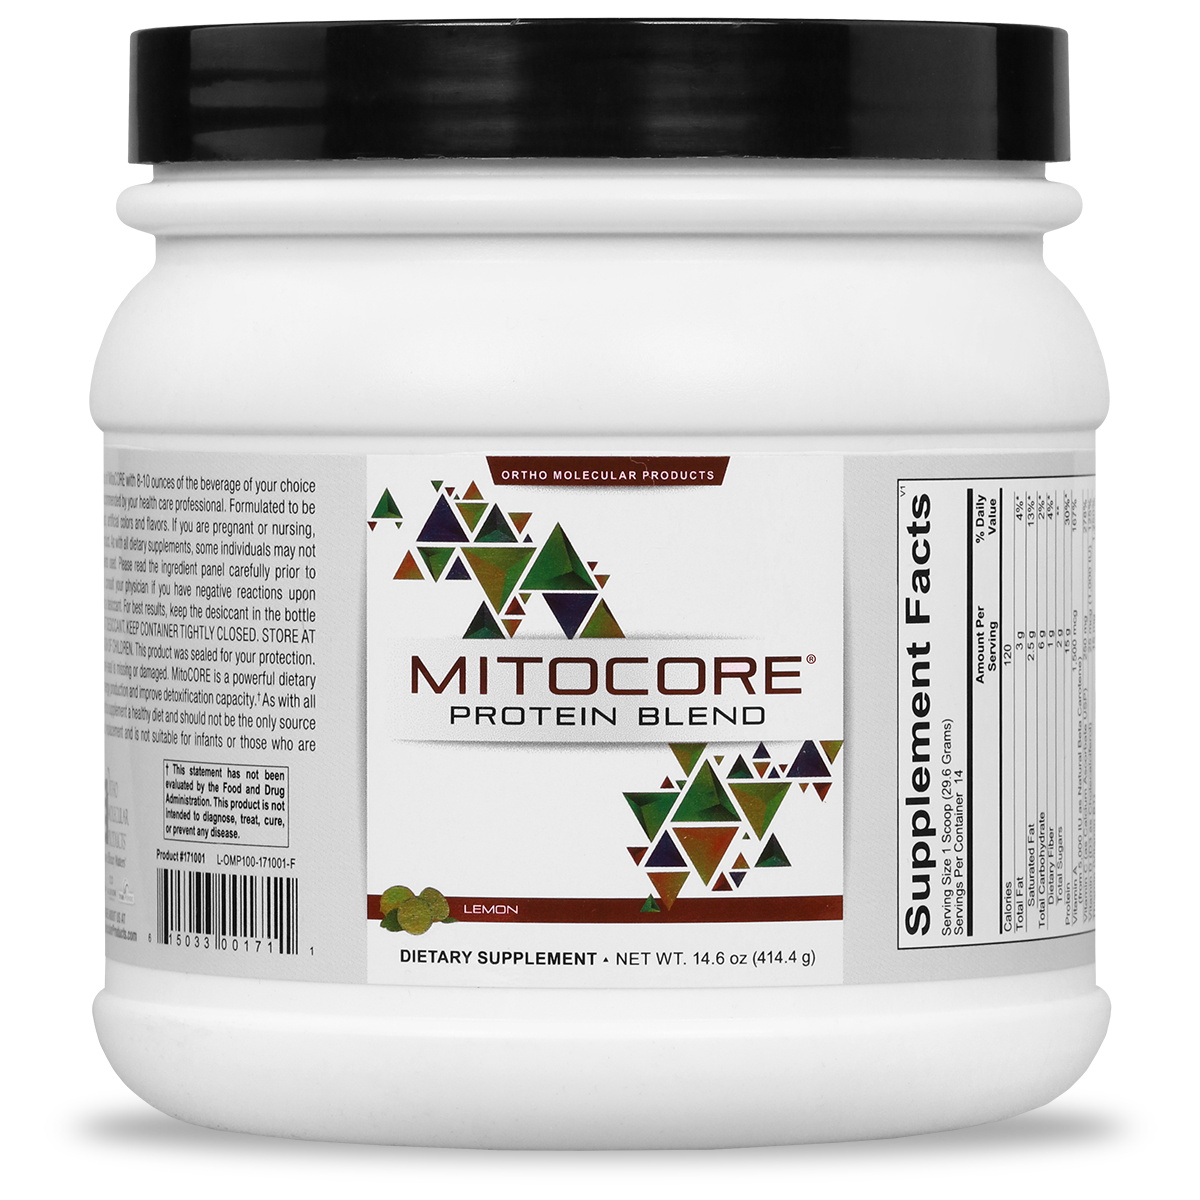 MitoCORE Protein Blend Lemon (171) product image